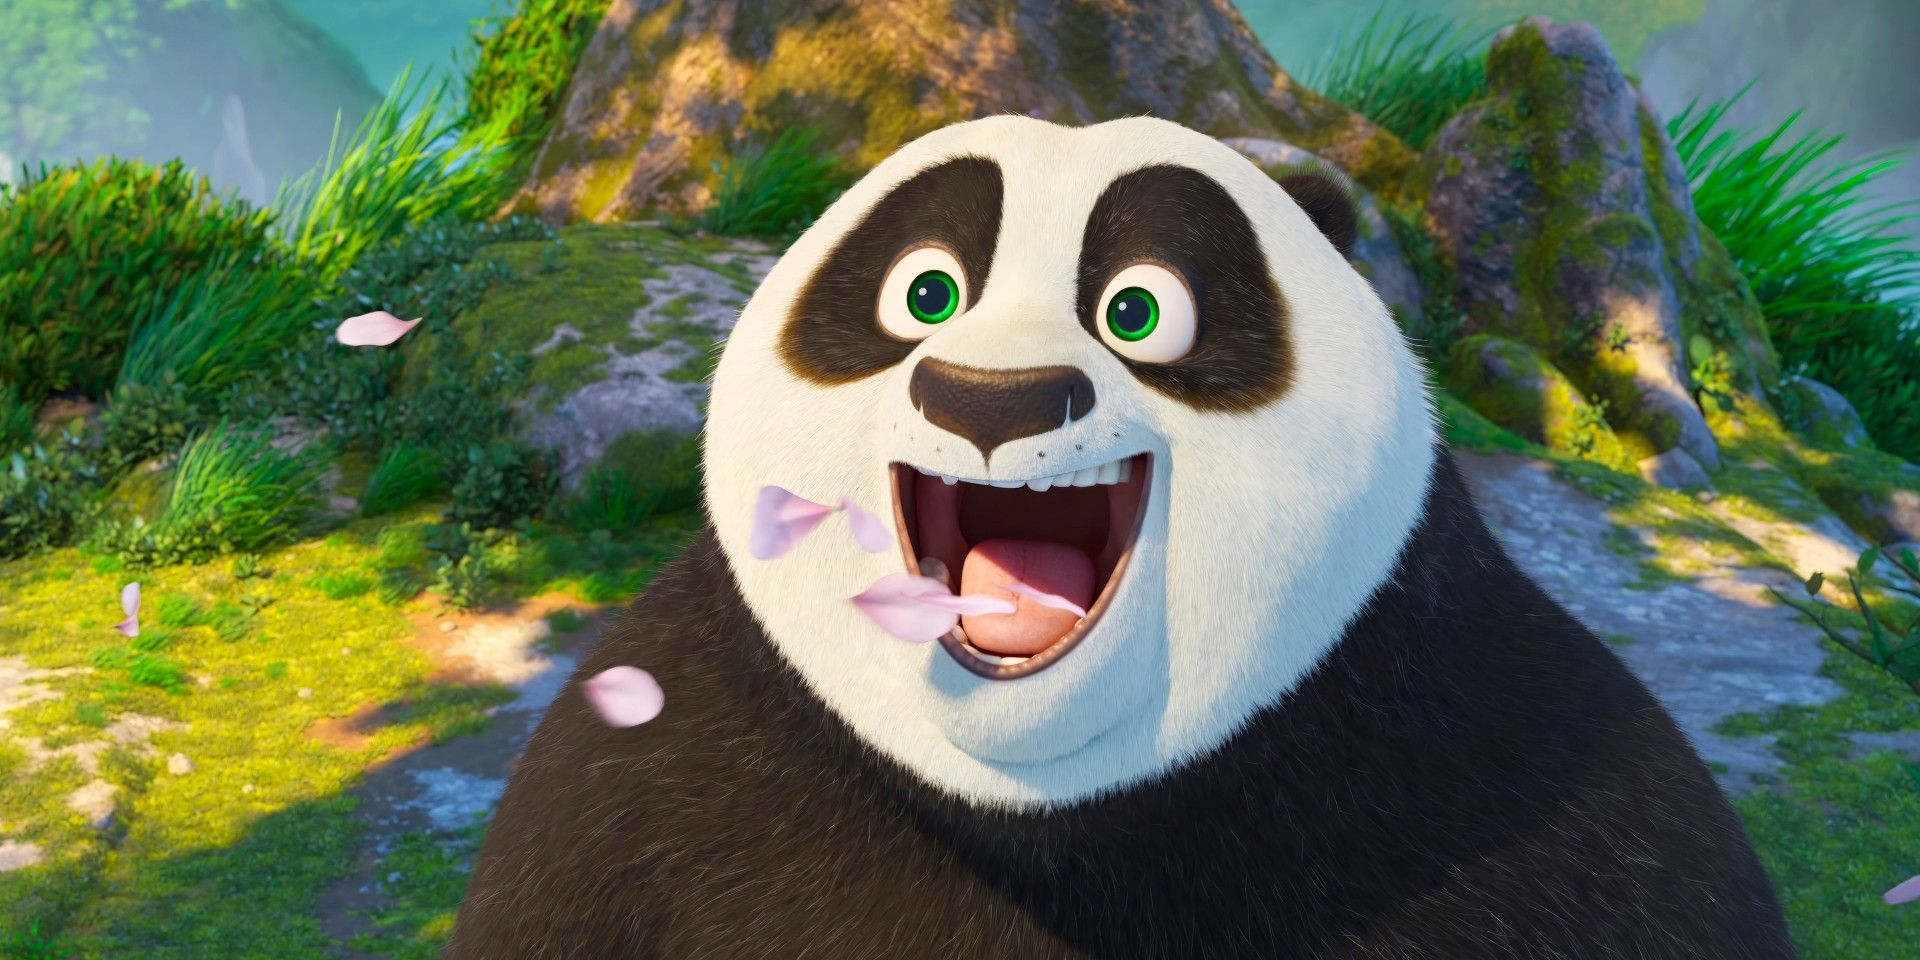 Po looking out in awe and joy with his mouth hanging open as flower petals flutter by in Kung Fu Panda 4